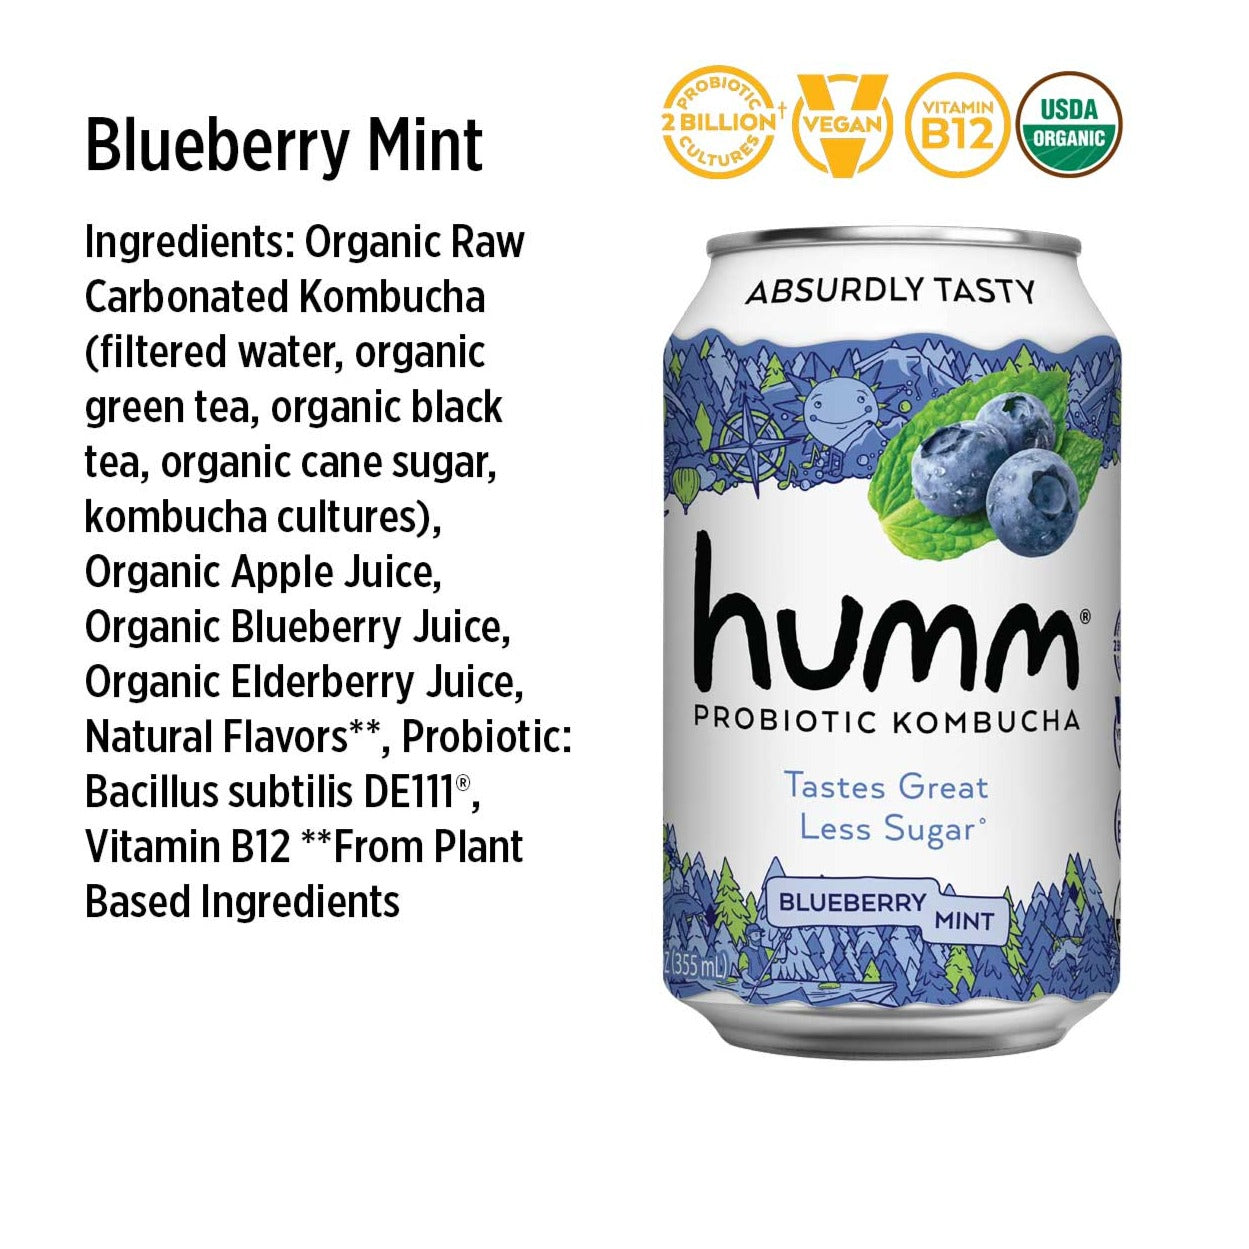 blueberry mint ingredients